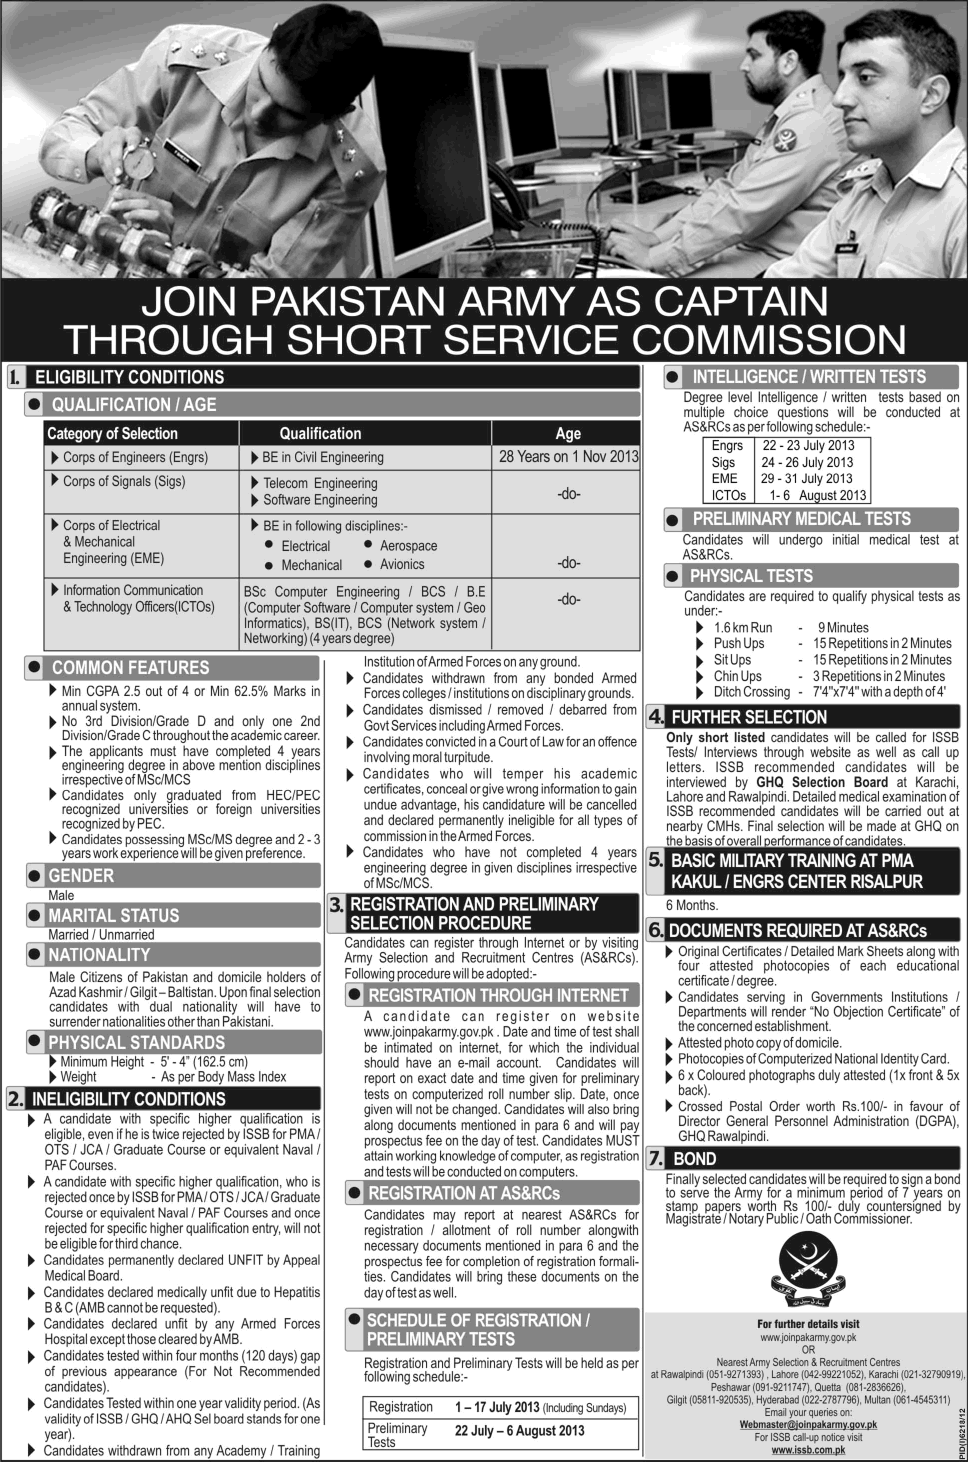 Join Pakistan Army as Captain through Short Service Commission 2013 July